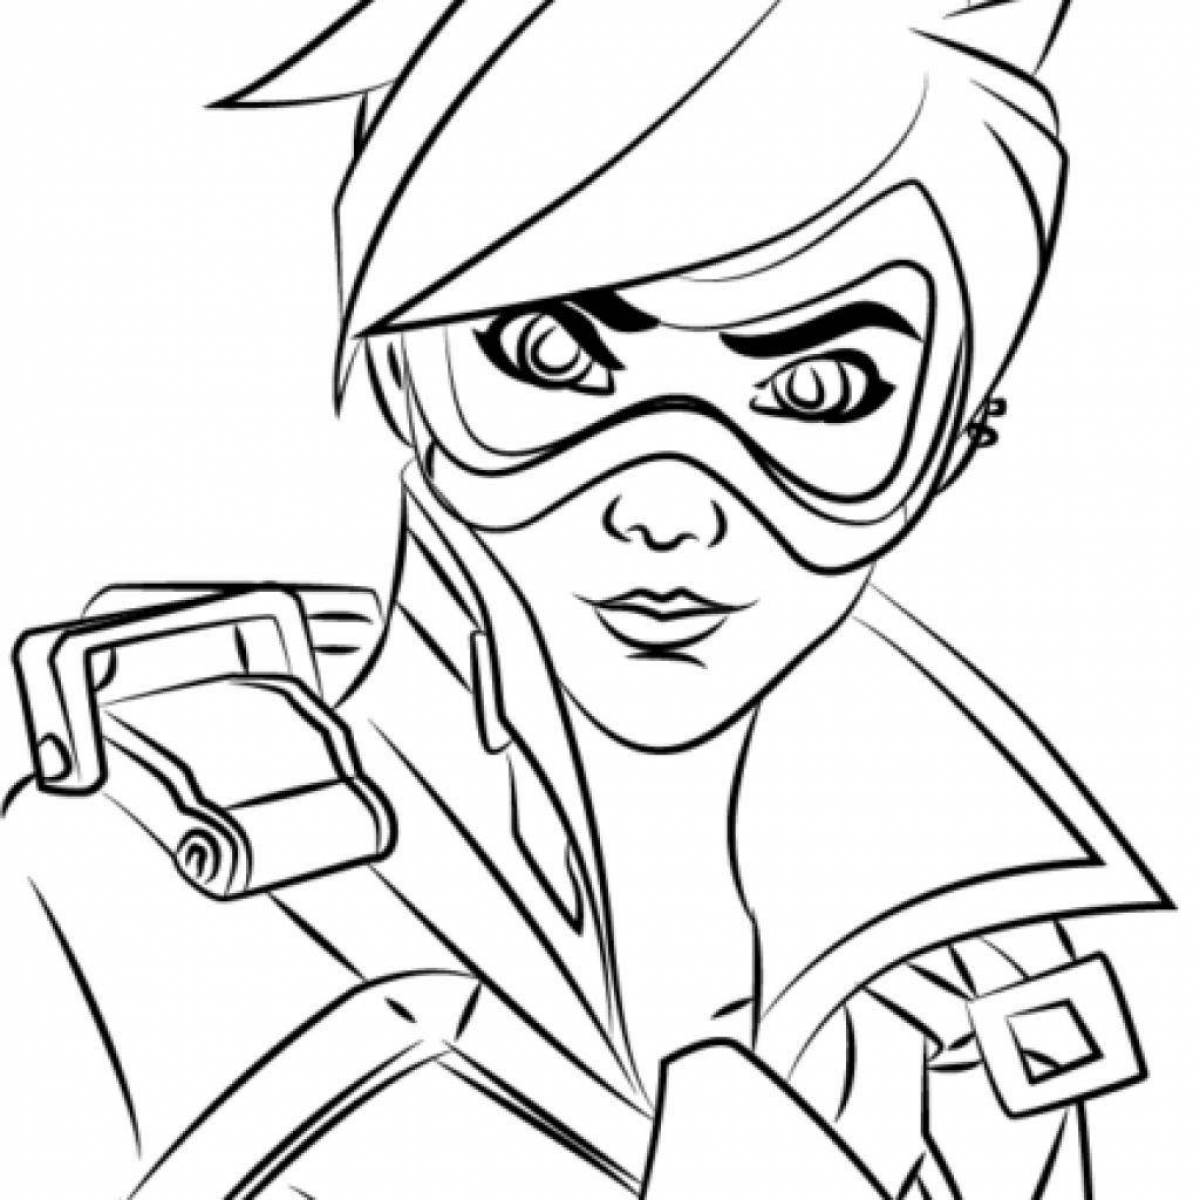 Overwatch live coloring page